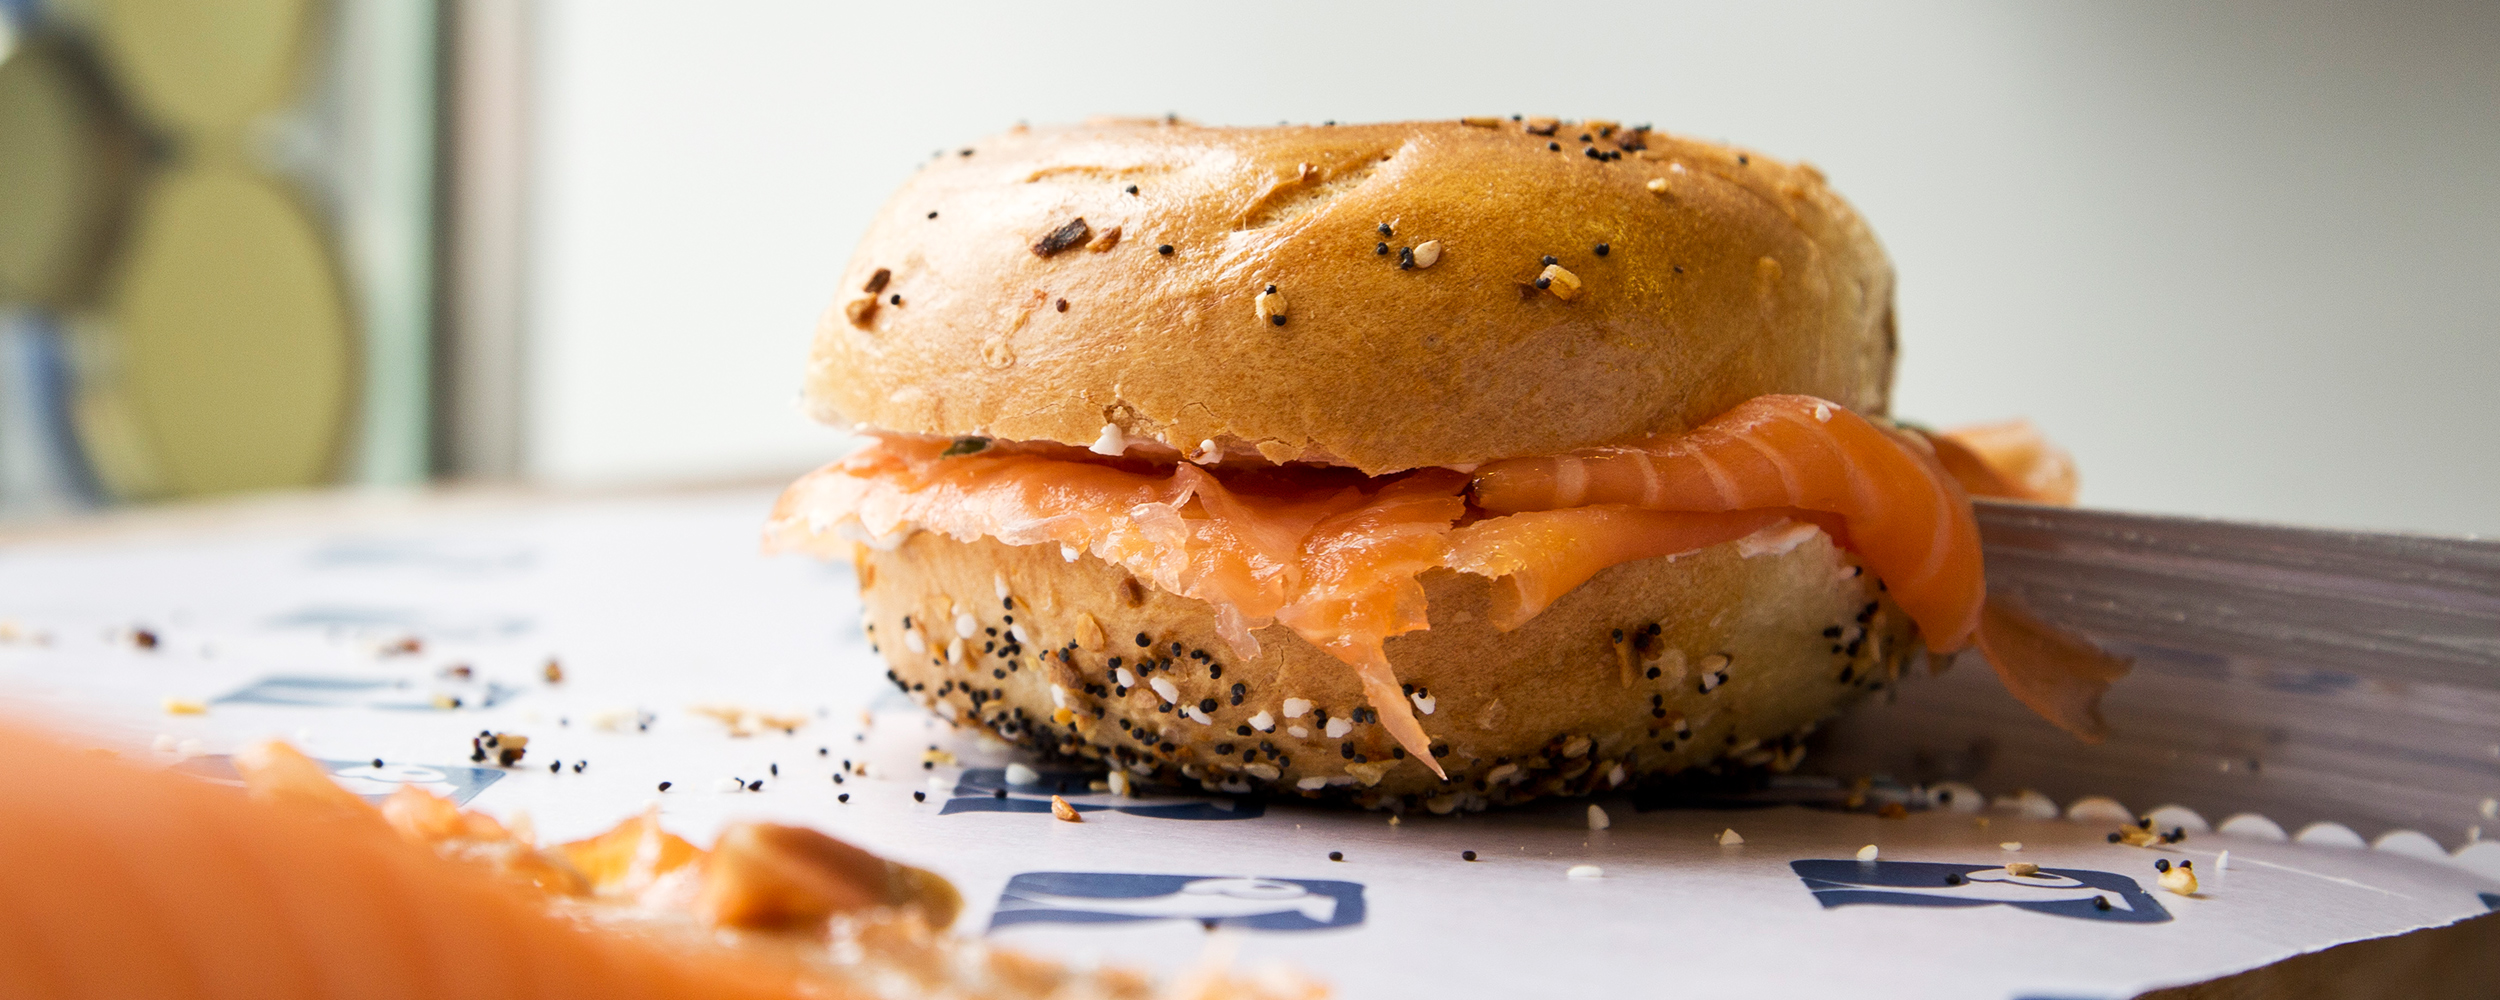 shop-home-image-bagel-and-lox-1.jpg